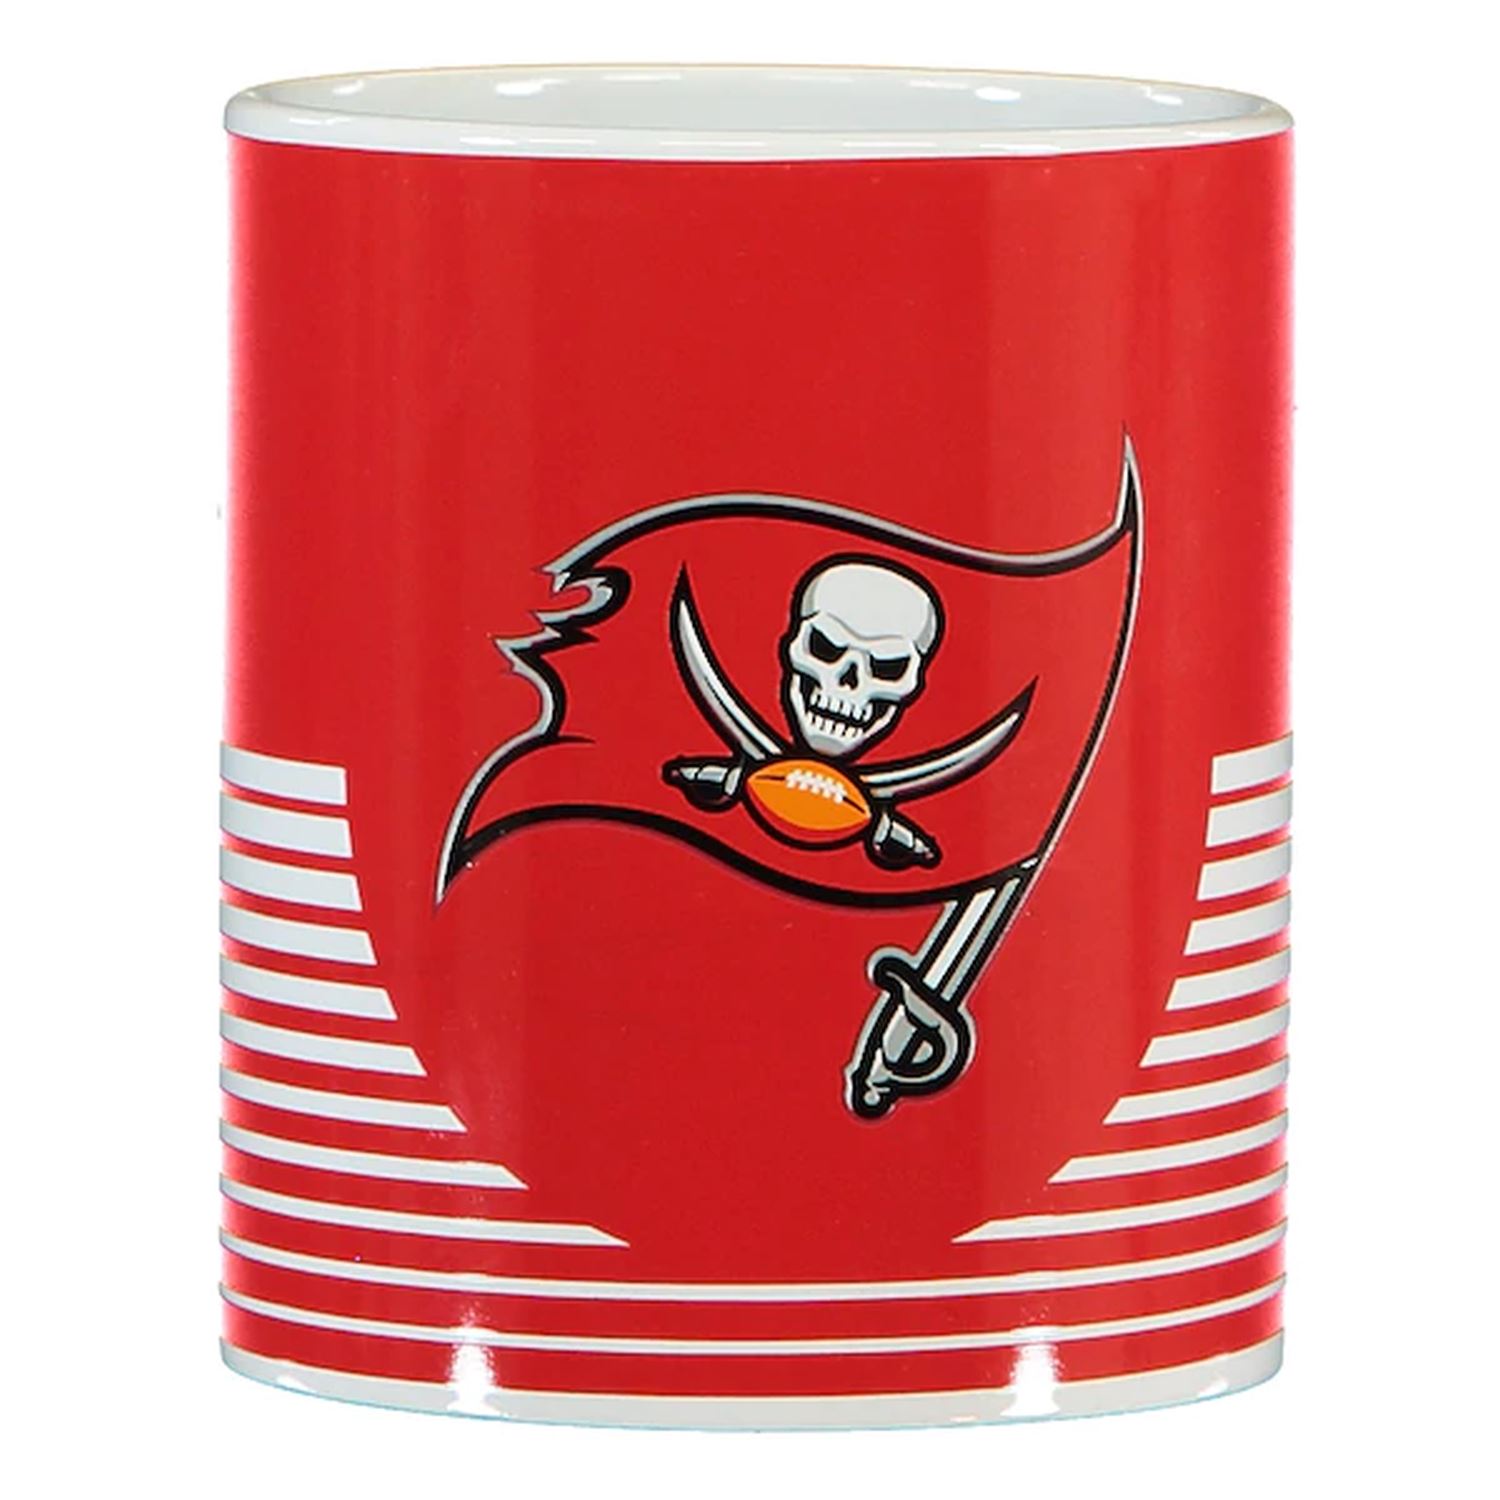 Tampa Bay Buccaneers NFL Linea Mug Red Tasse Forever Collectibles